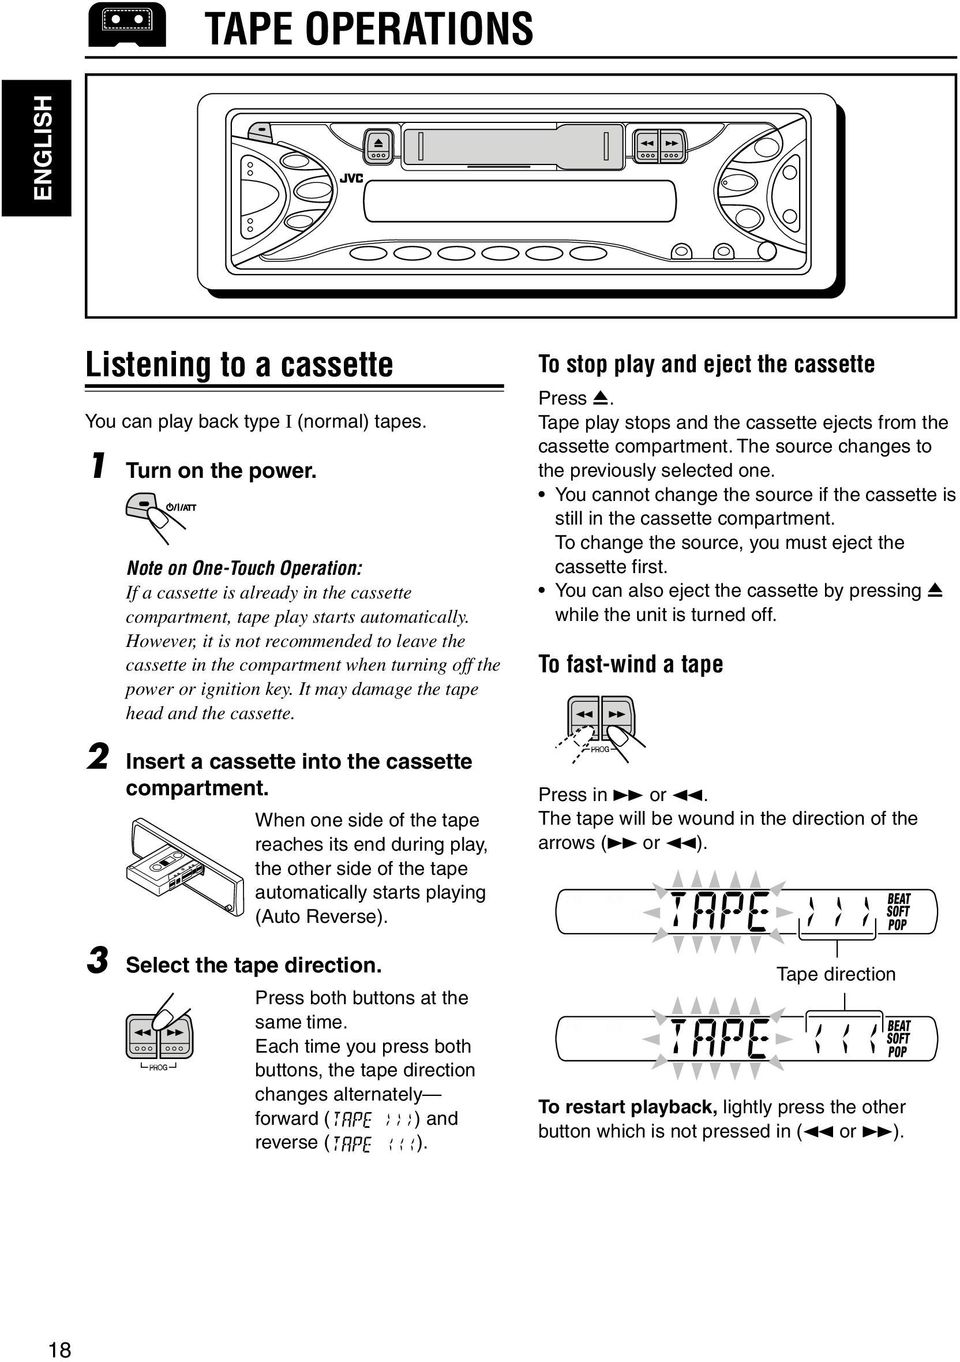 However, it is not recommended to leave the cassette in the compartment when turning off the power or ignition key. It may damage the tape head and the cassette.